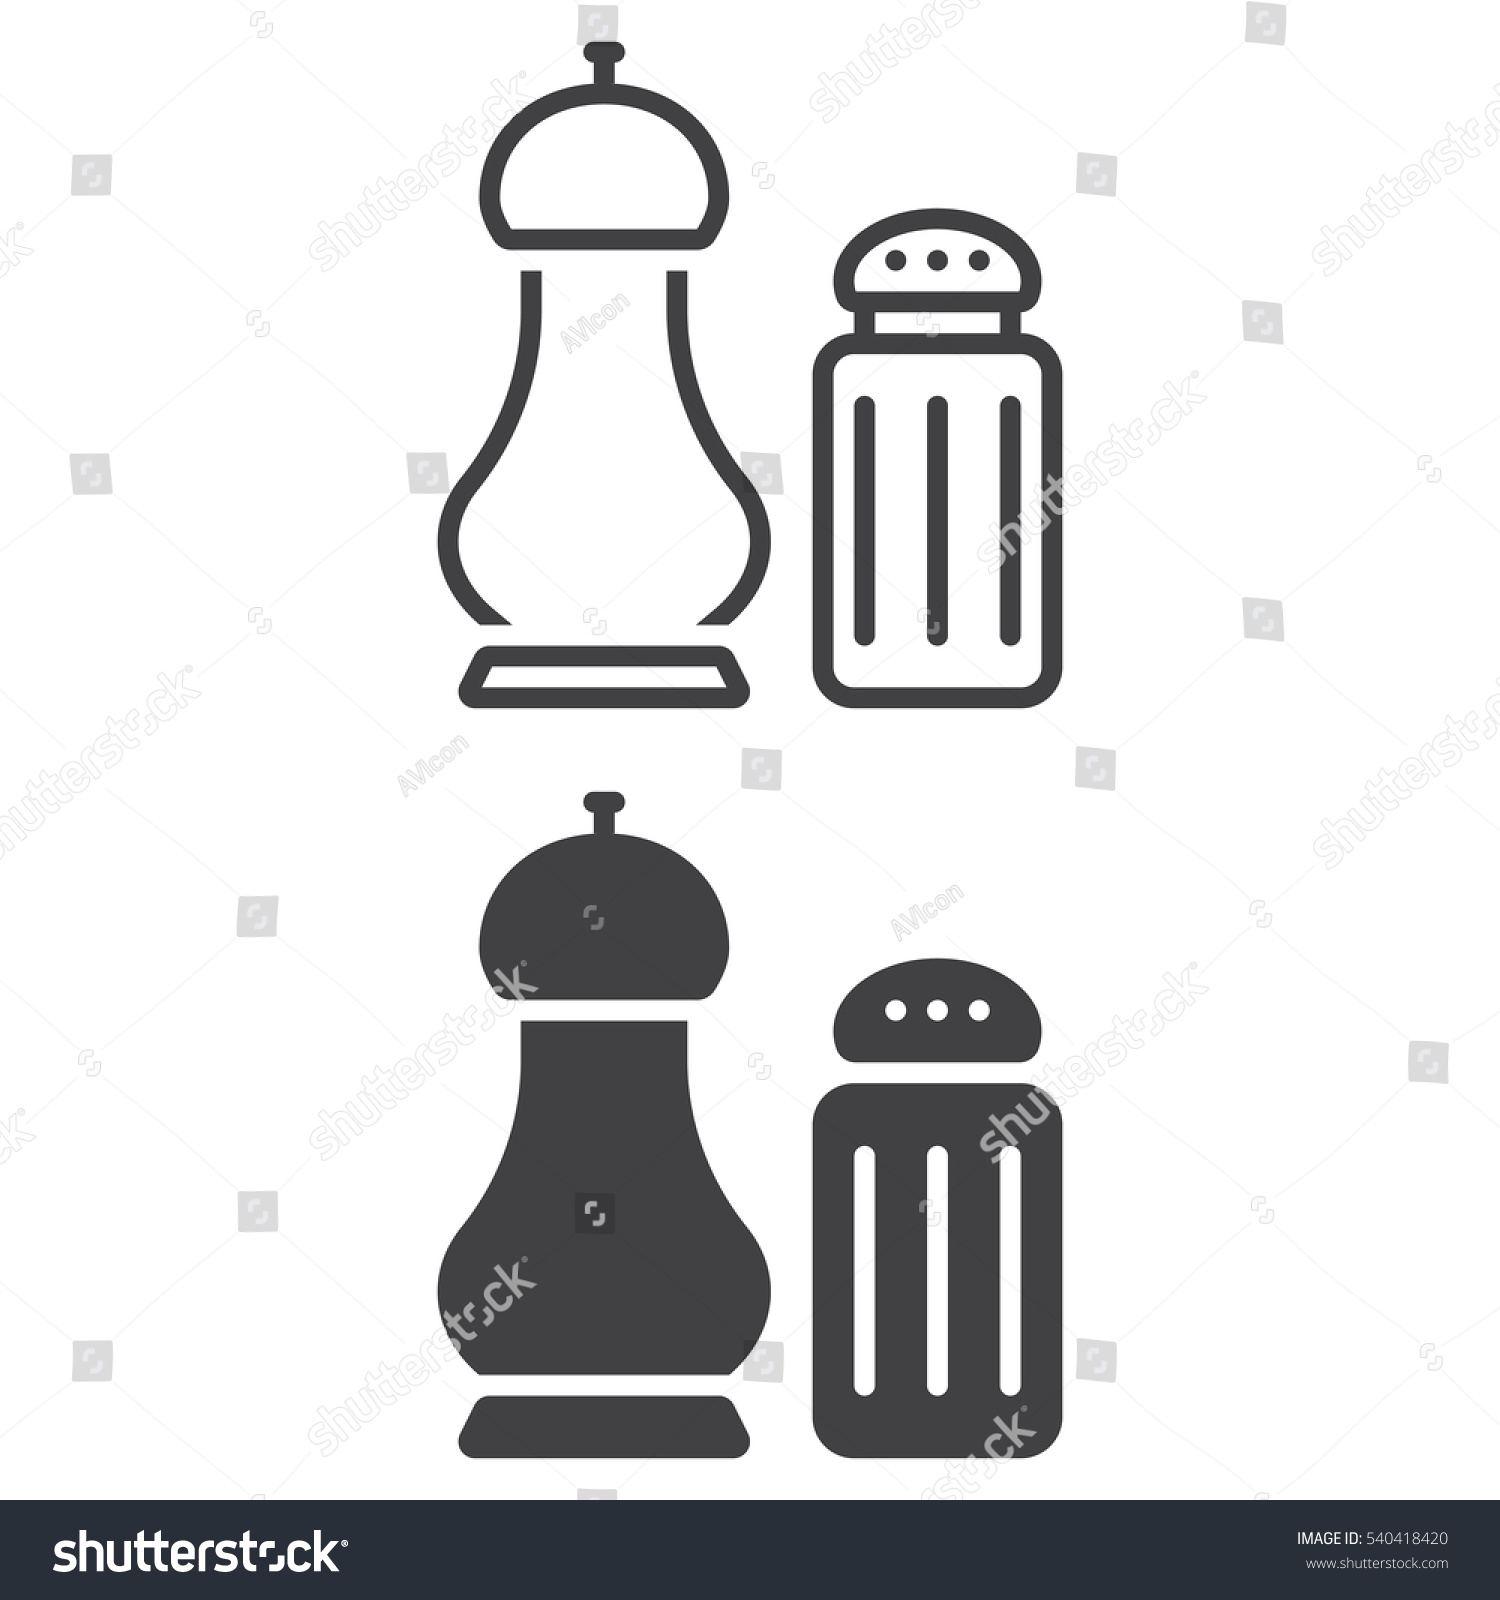 Salt and pepper shakers line icon, outline and filled vector sign, linear and full pictogram isolated on white. Symbol, logo illustration #540418420